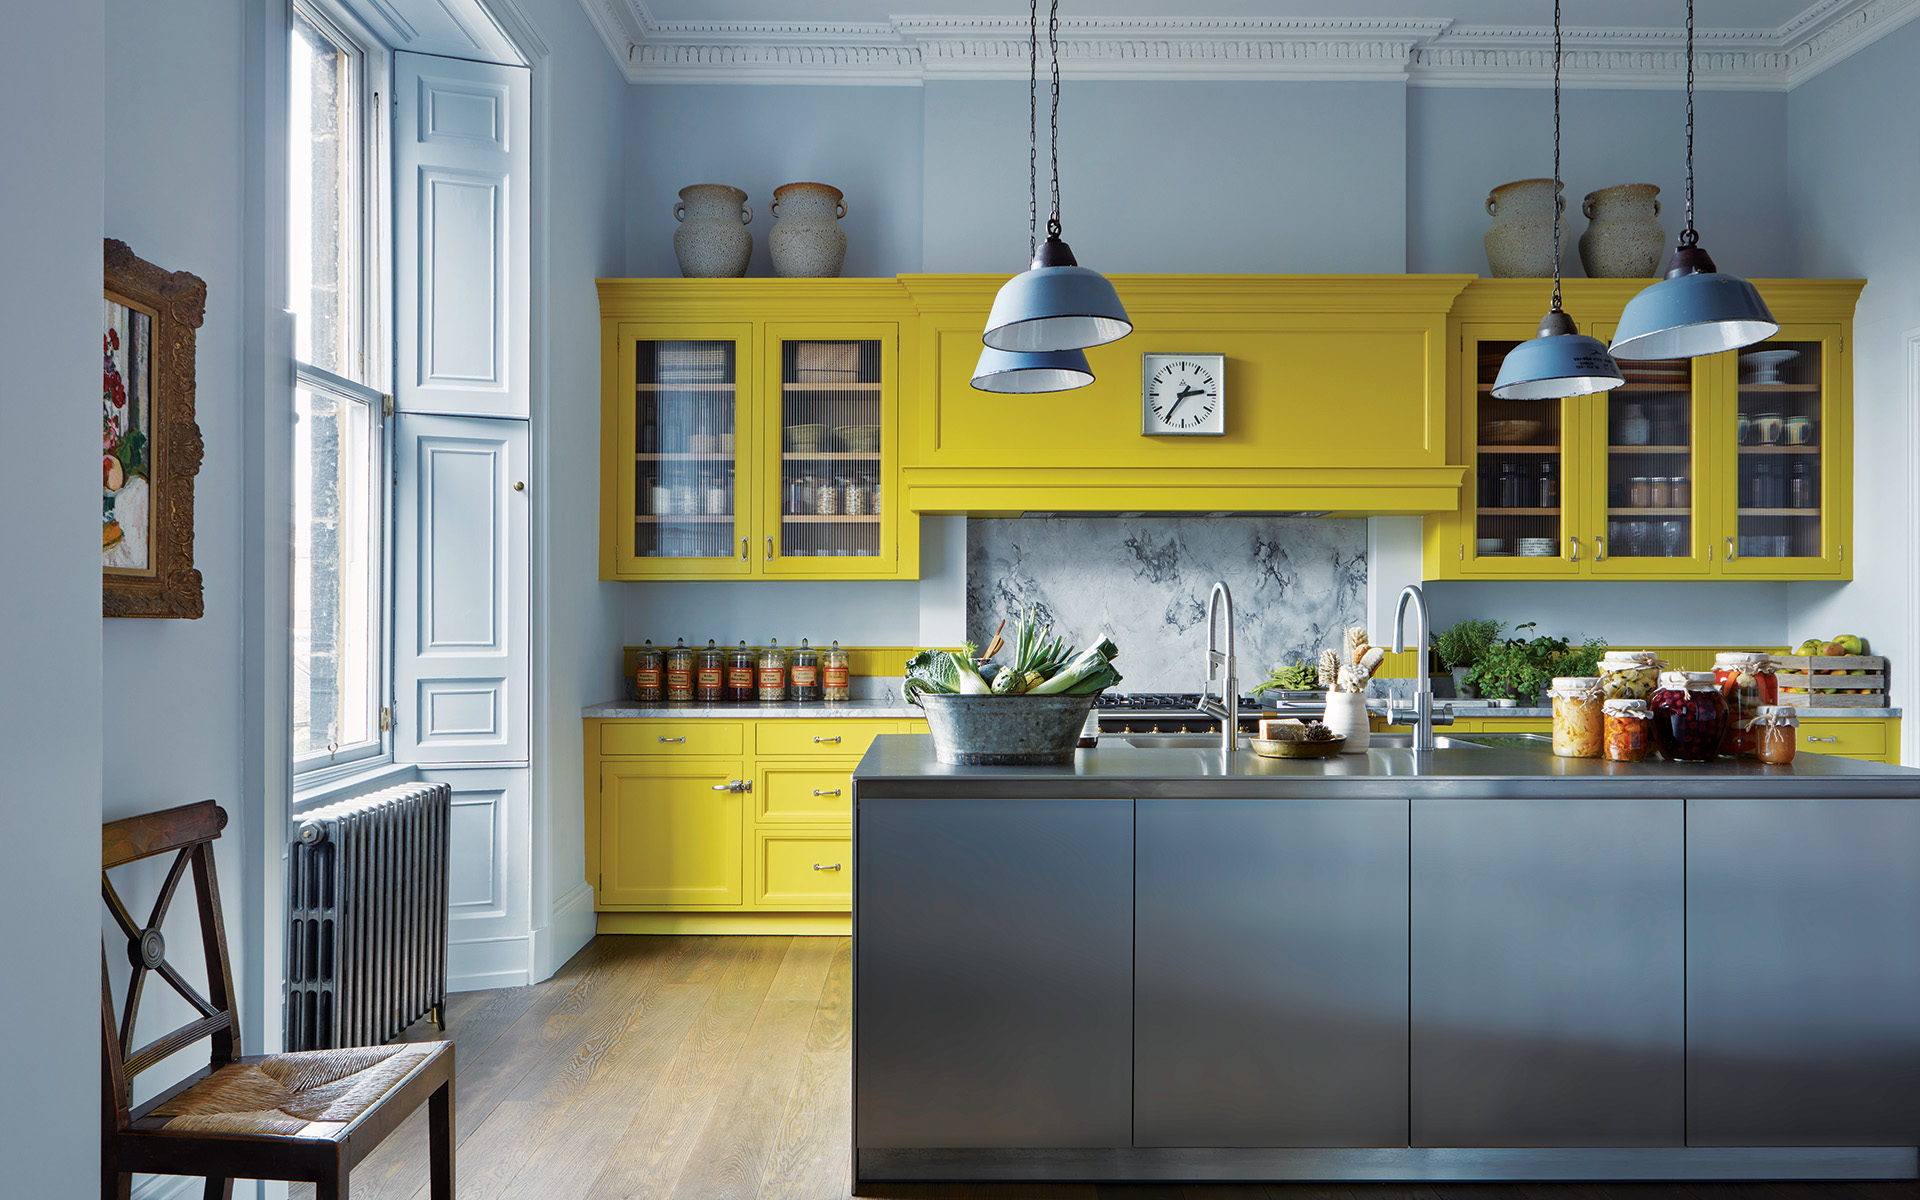 The Art of Kitchen Design: Balancing Aesthetics and Functionality